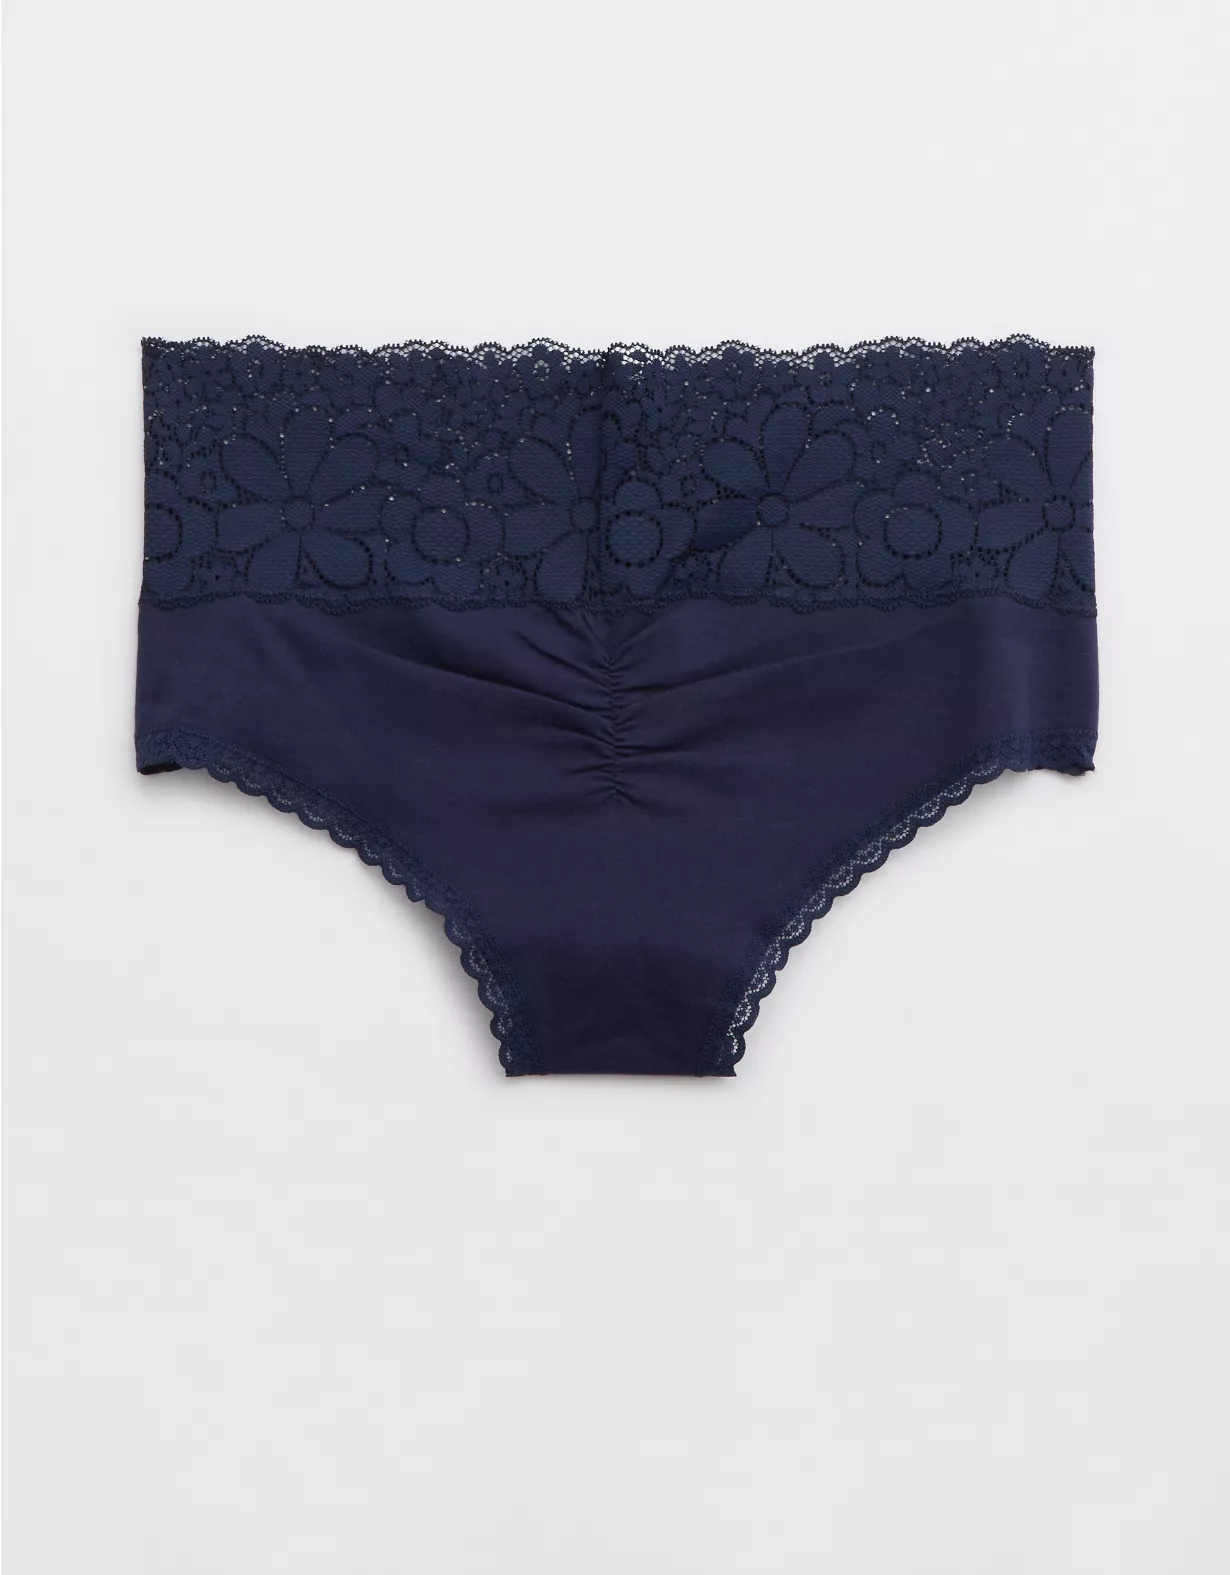 Aerie Candy Lace Cotton Cheeky Underwear